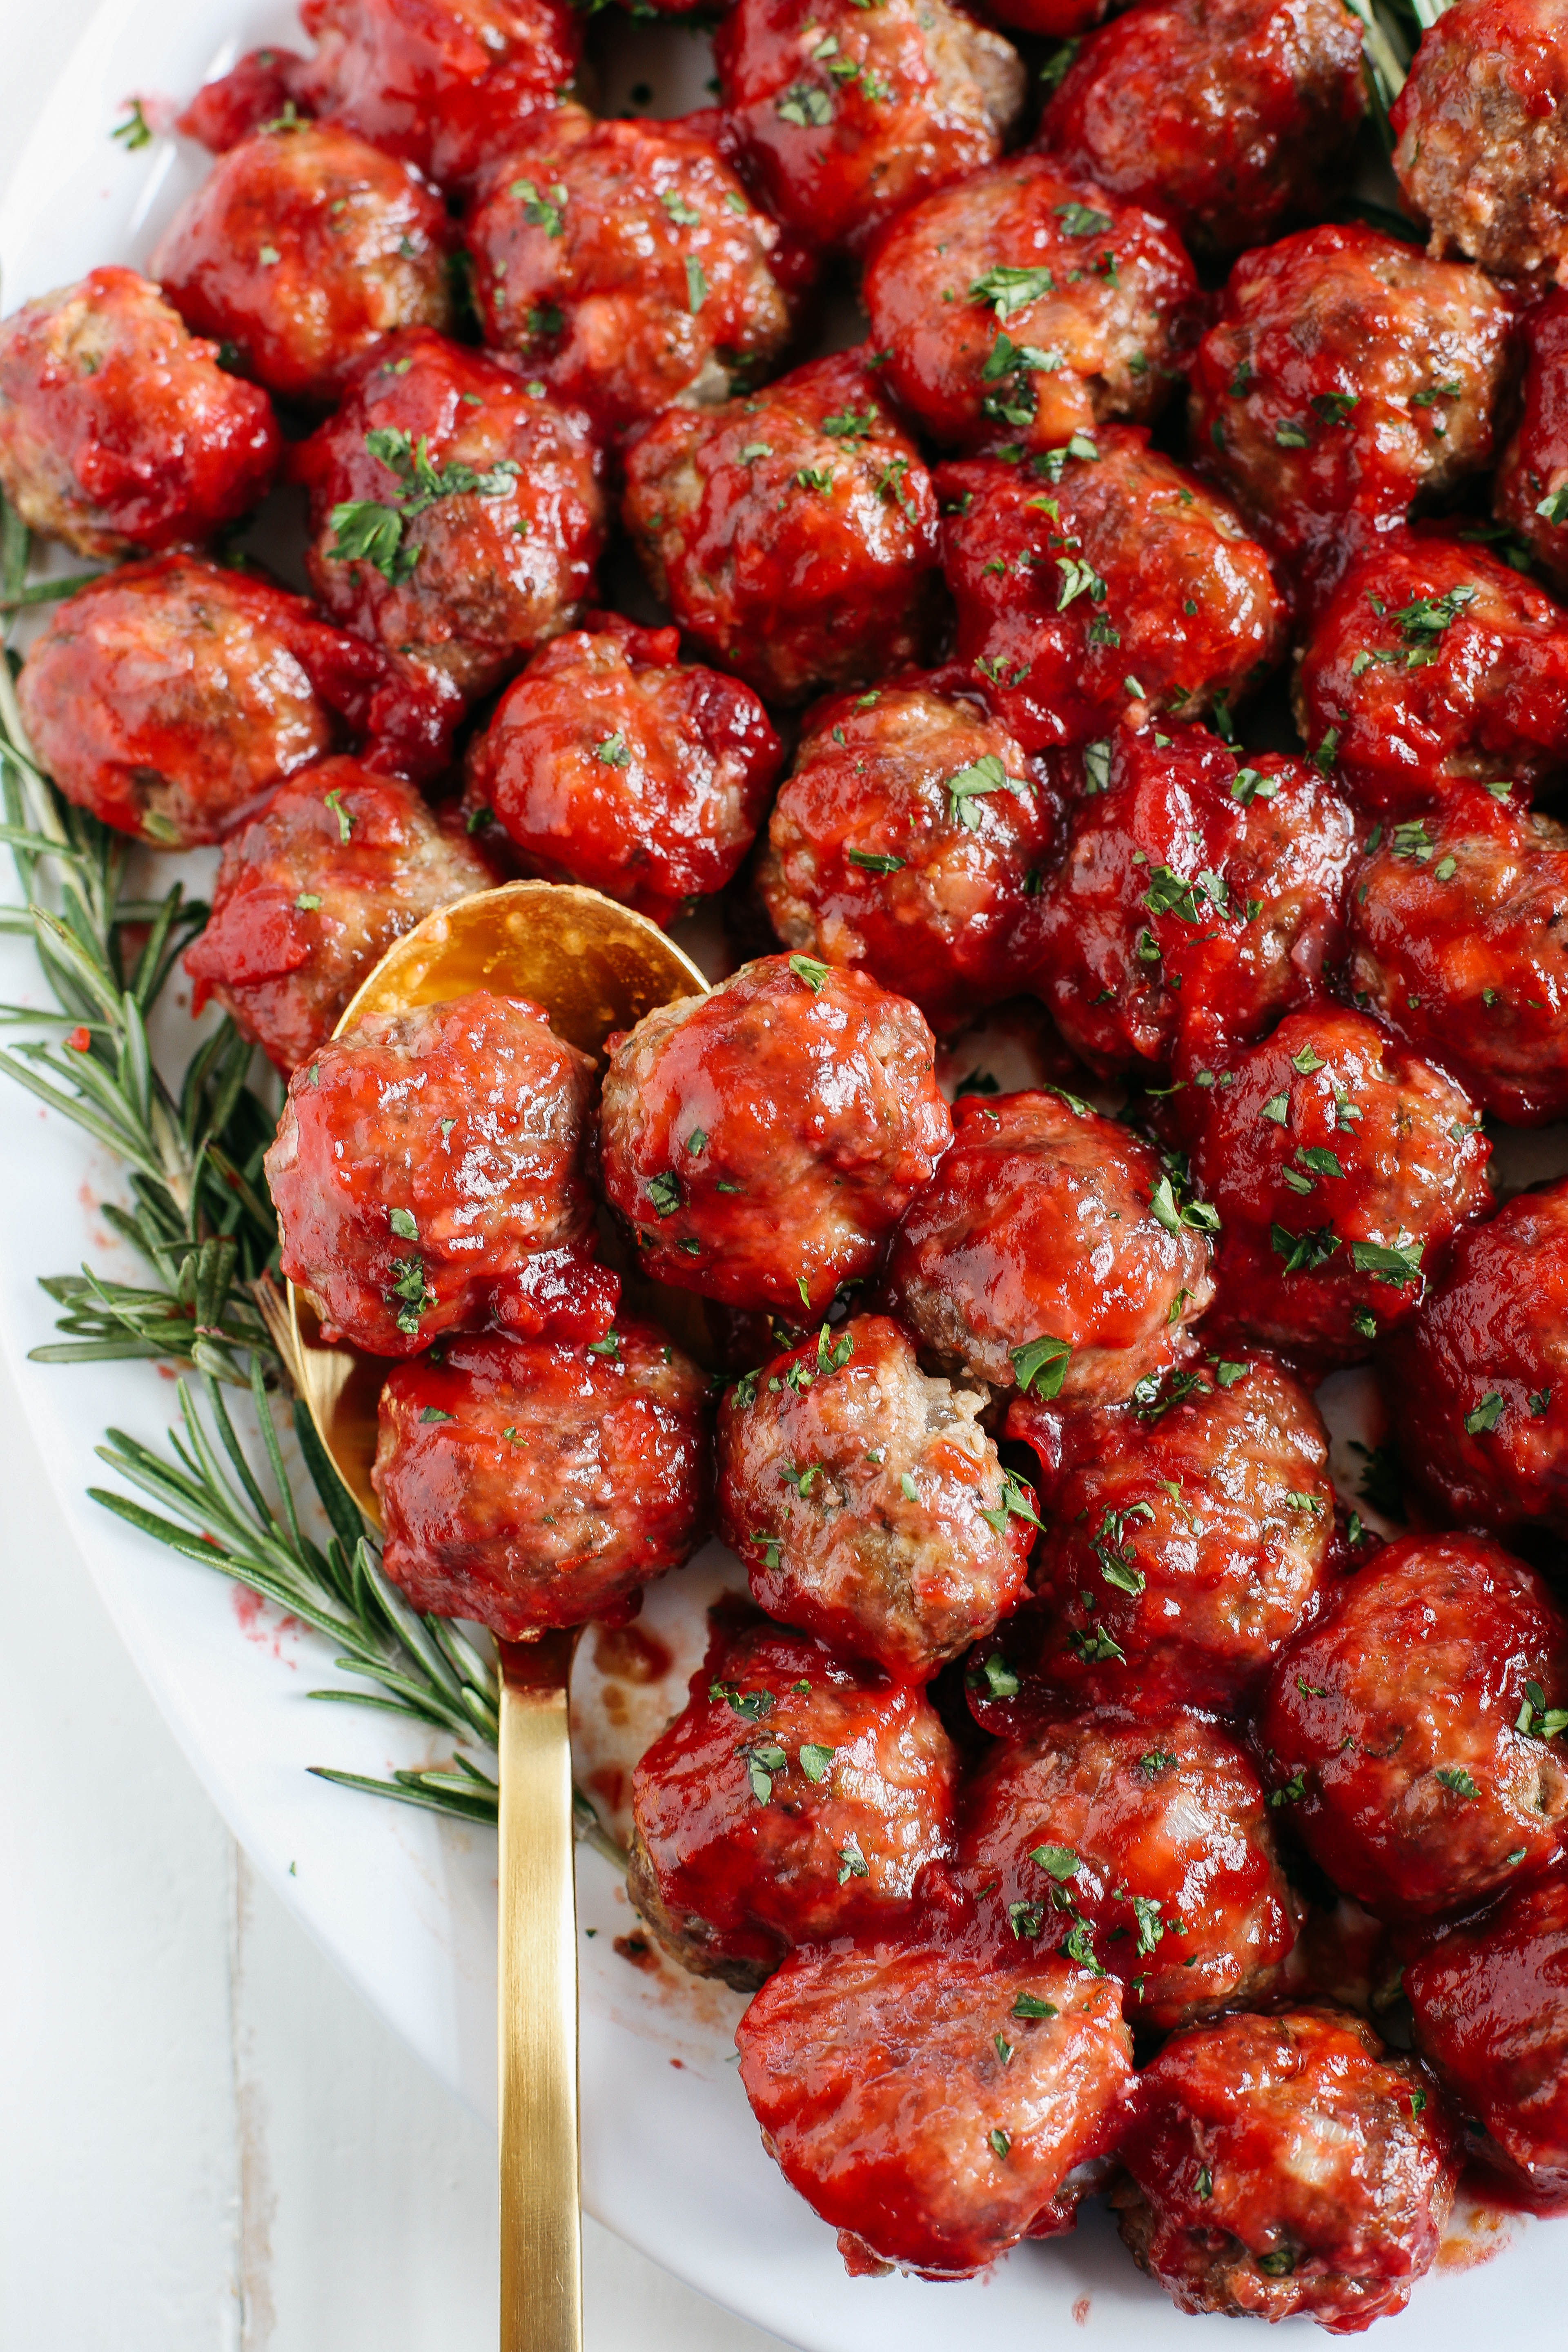 These Cranberry Cocktail Meatballs make the perfect holiday appetizer that are easy to throw together with the perfect blend of sweet and savory flavors!